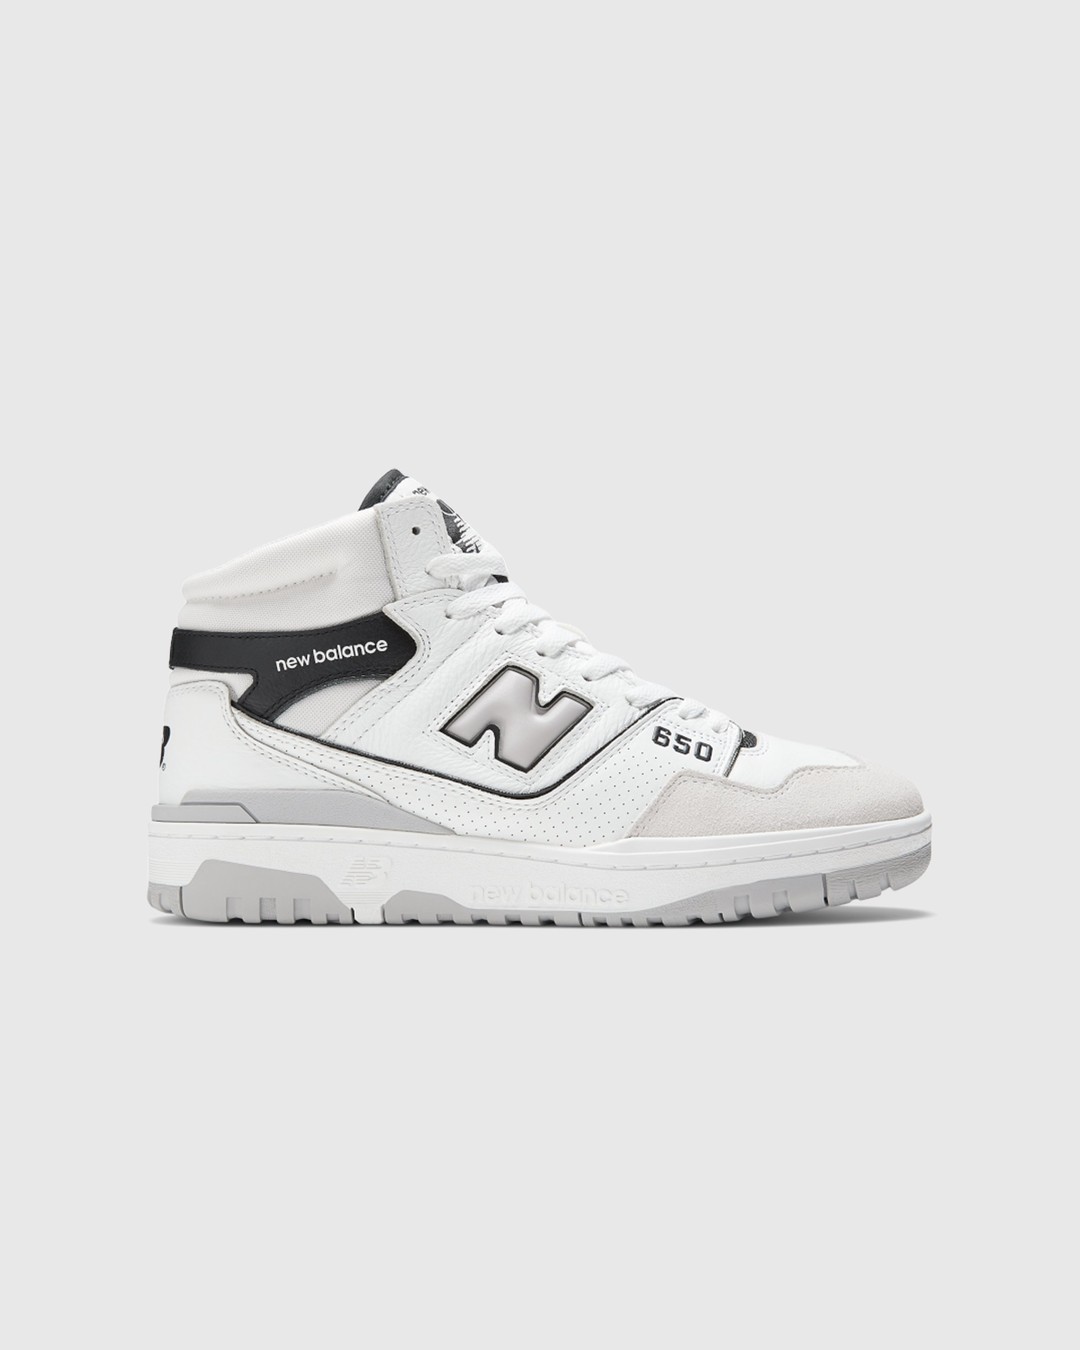 New Balance – BB 650 RWH White - Sneakers - White - Image 1